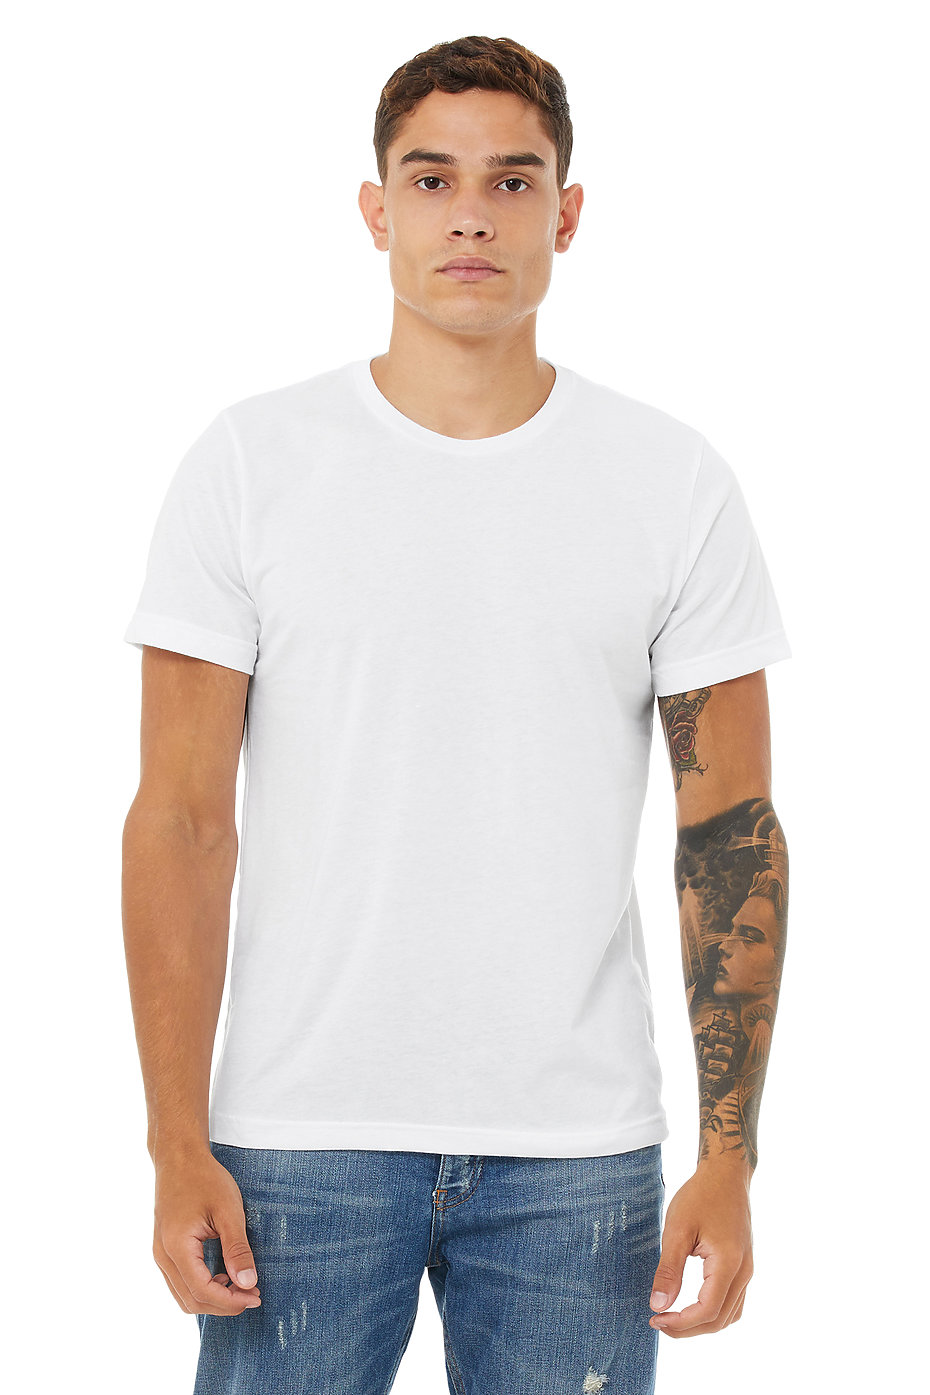 Wholesale Mens Cotton Short Sleeve T Shirts Mix Colors And Mix Sizes - at 